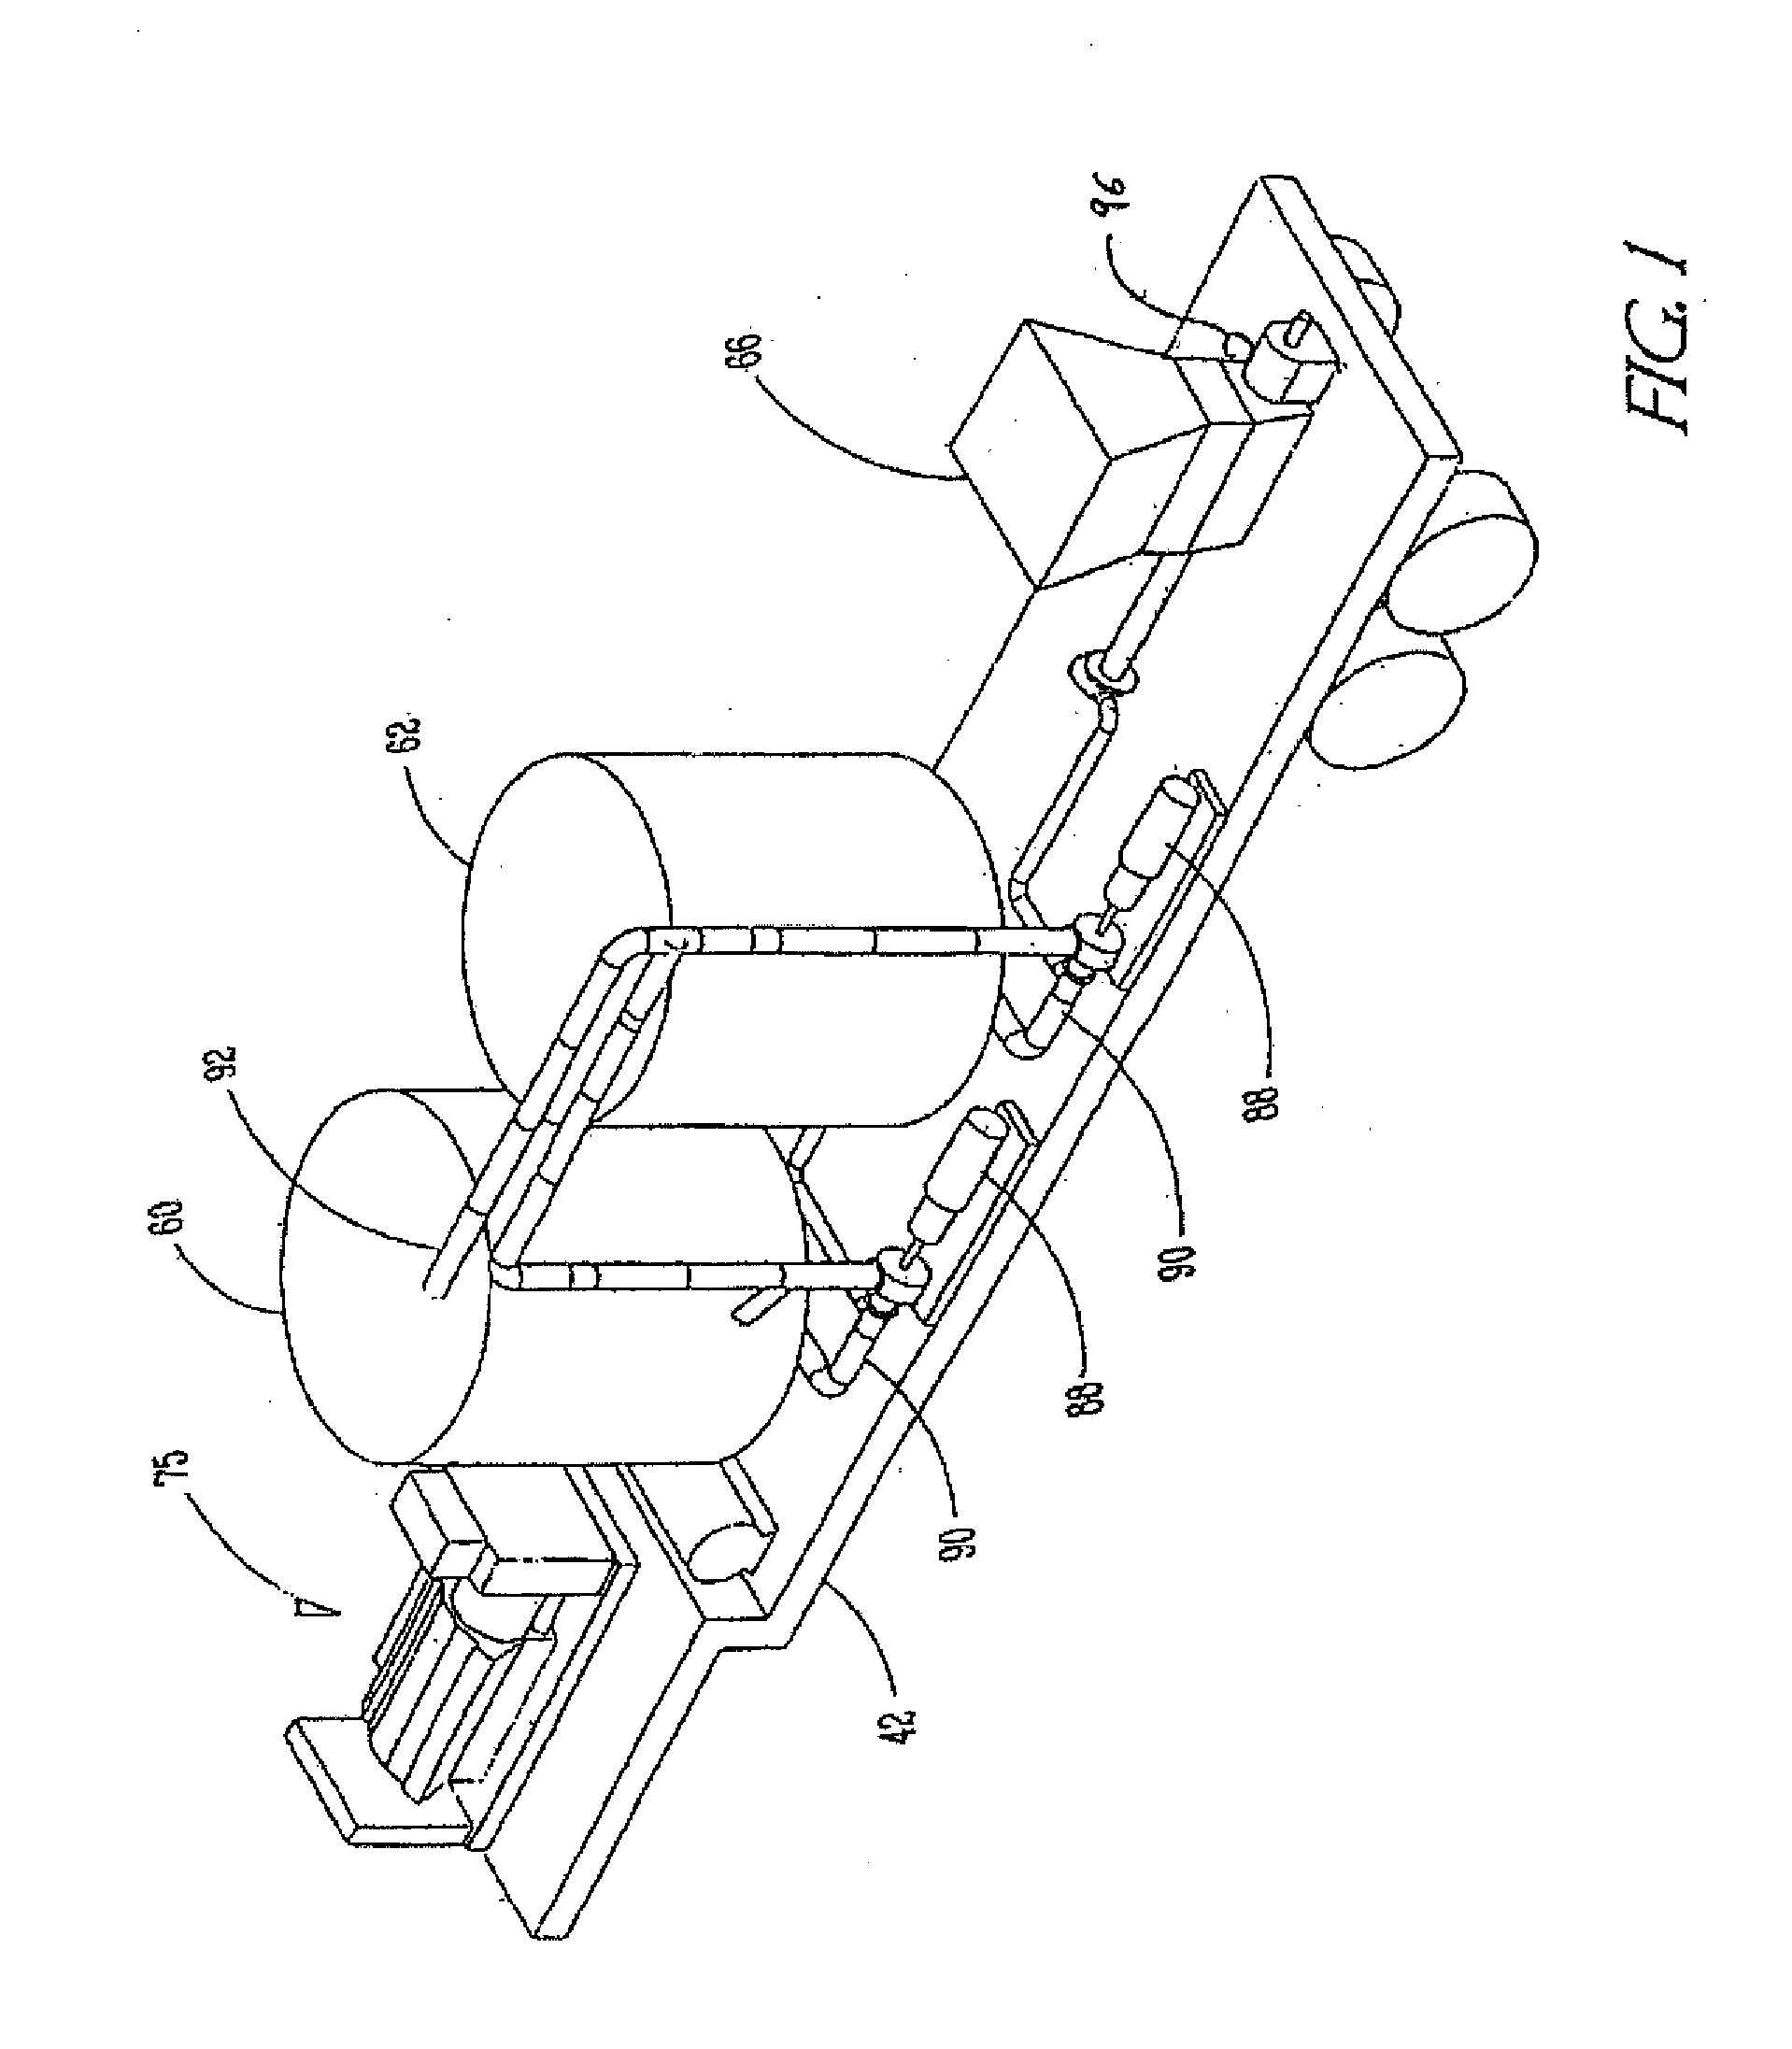 Apparatus for Recycling of Protein Waste and Fuel Production